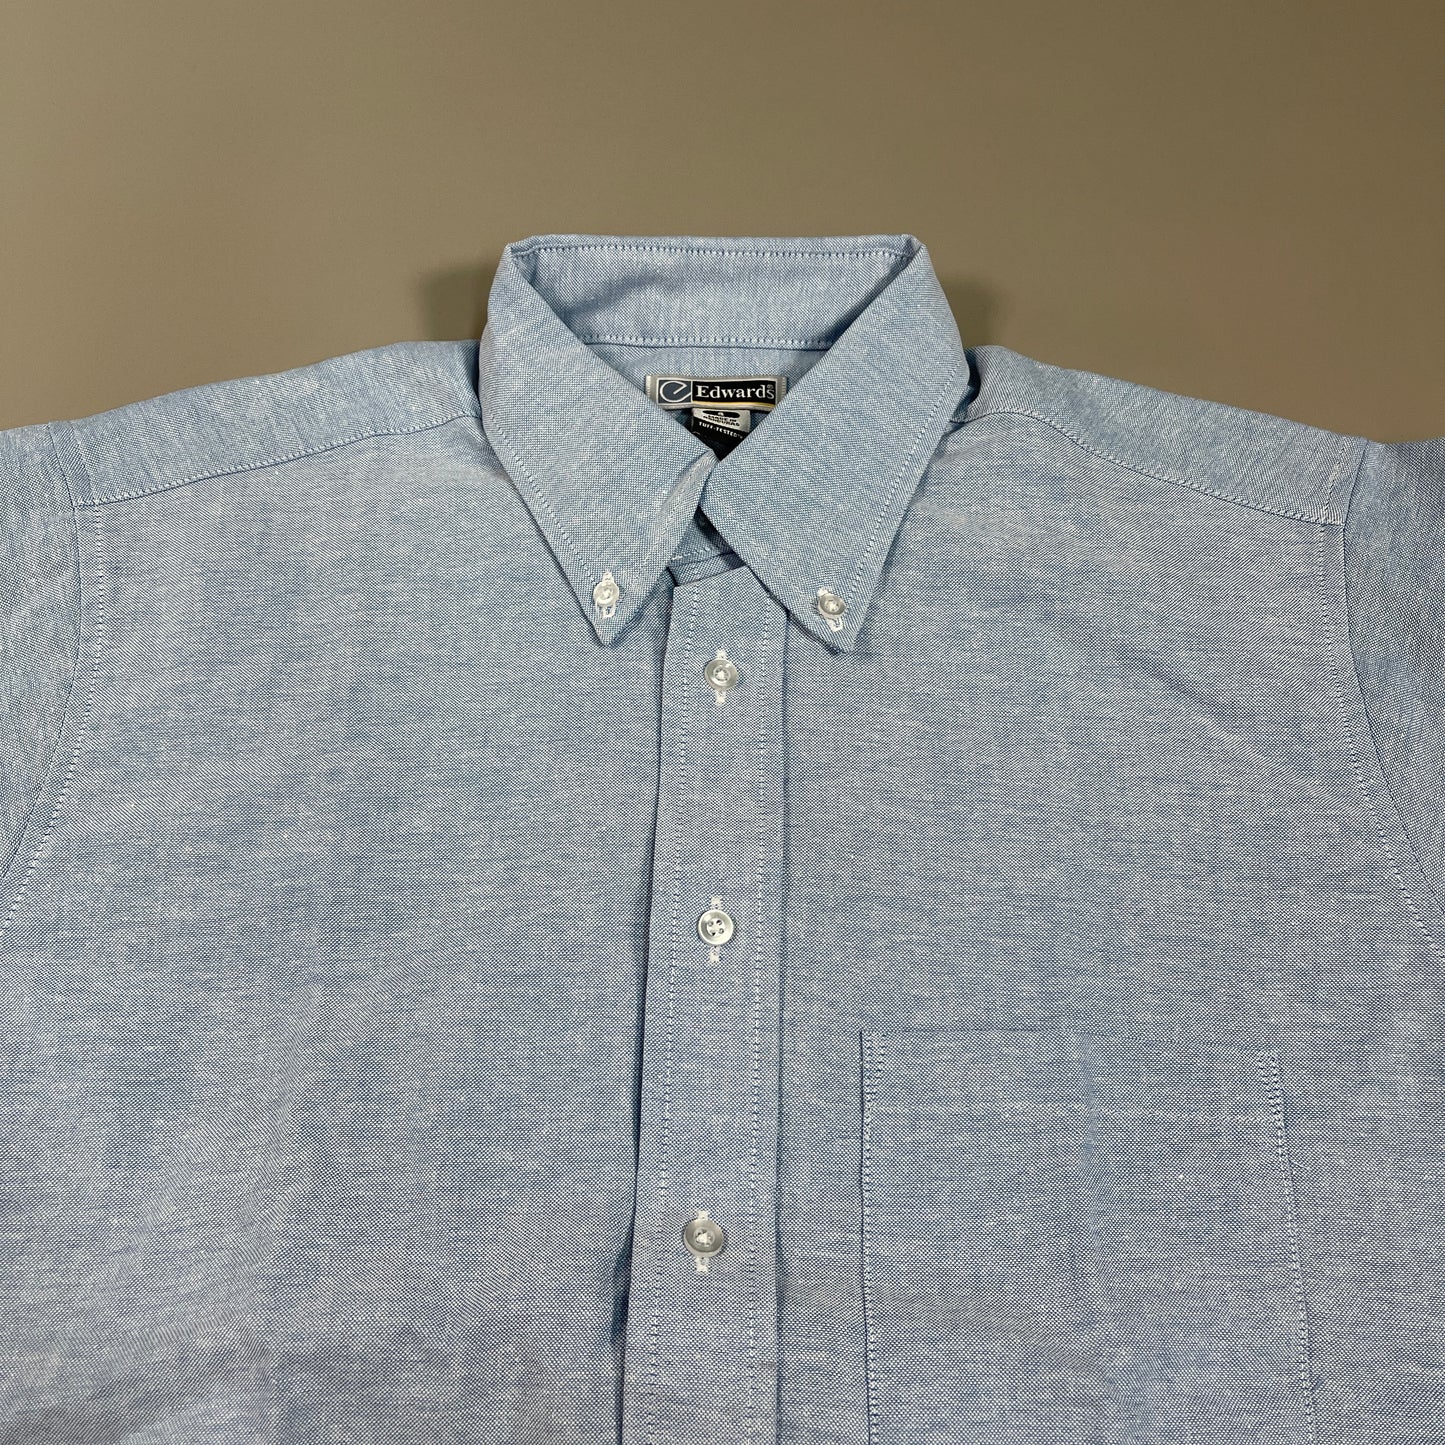 EDWARDS Tuff Tested Short Sleeve Button Up Oxford Shirt Men's Top Sz S Blue (New)